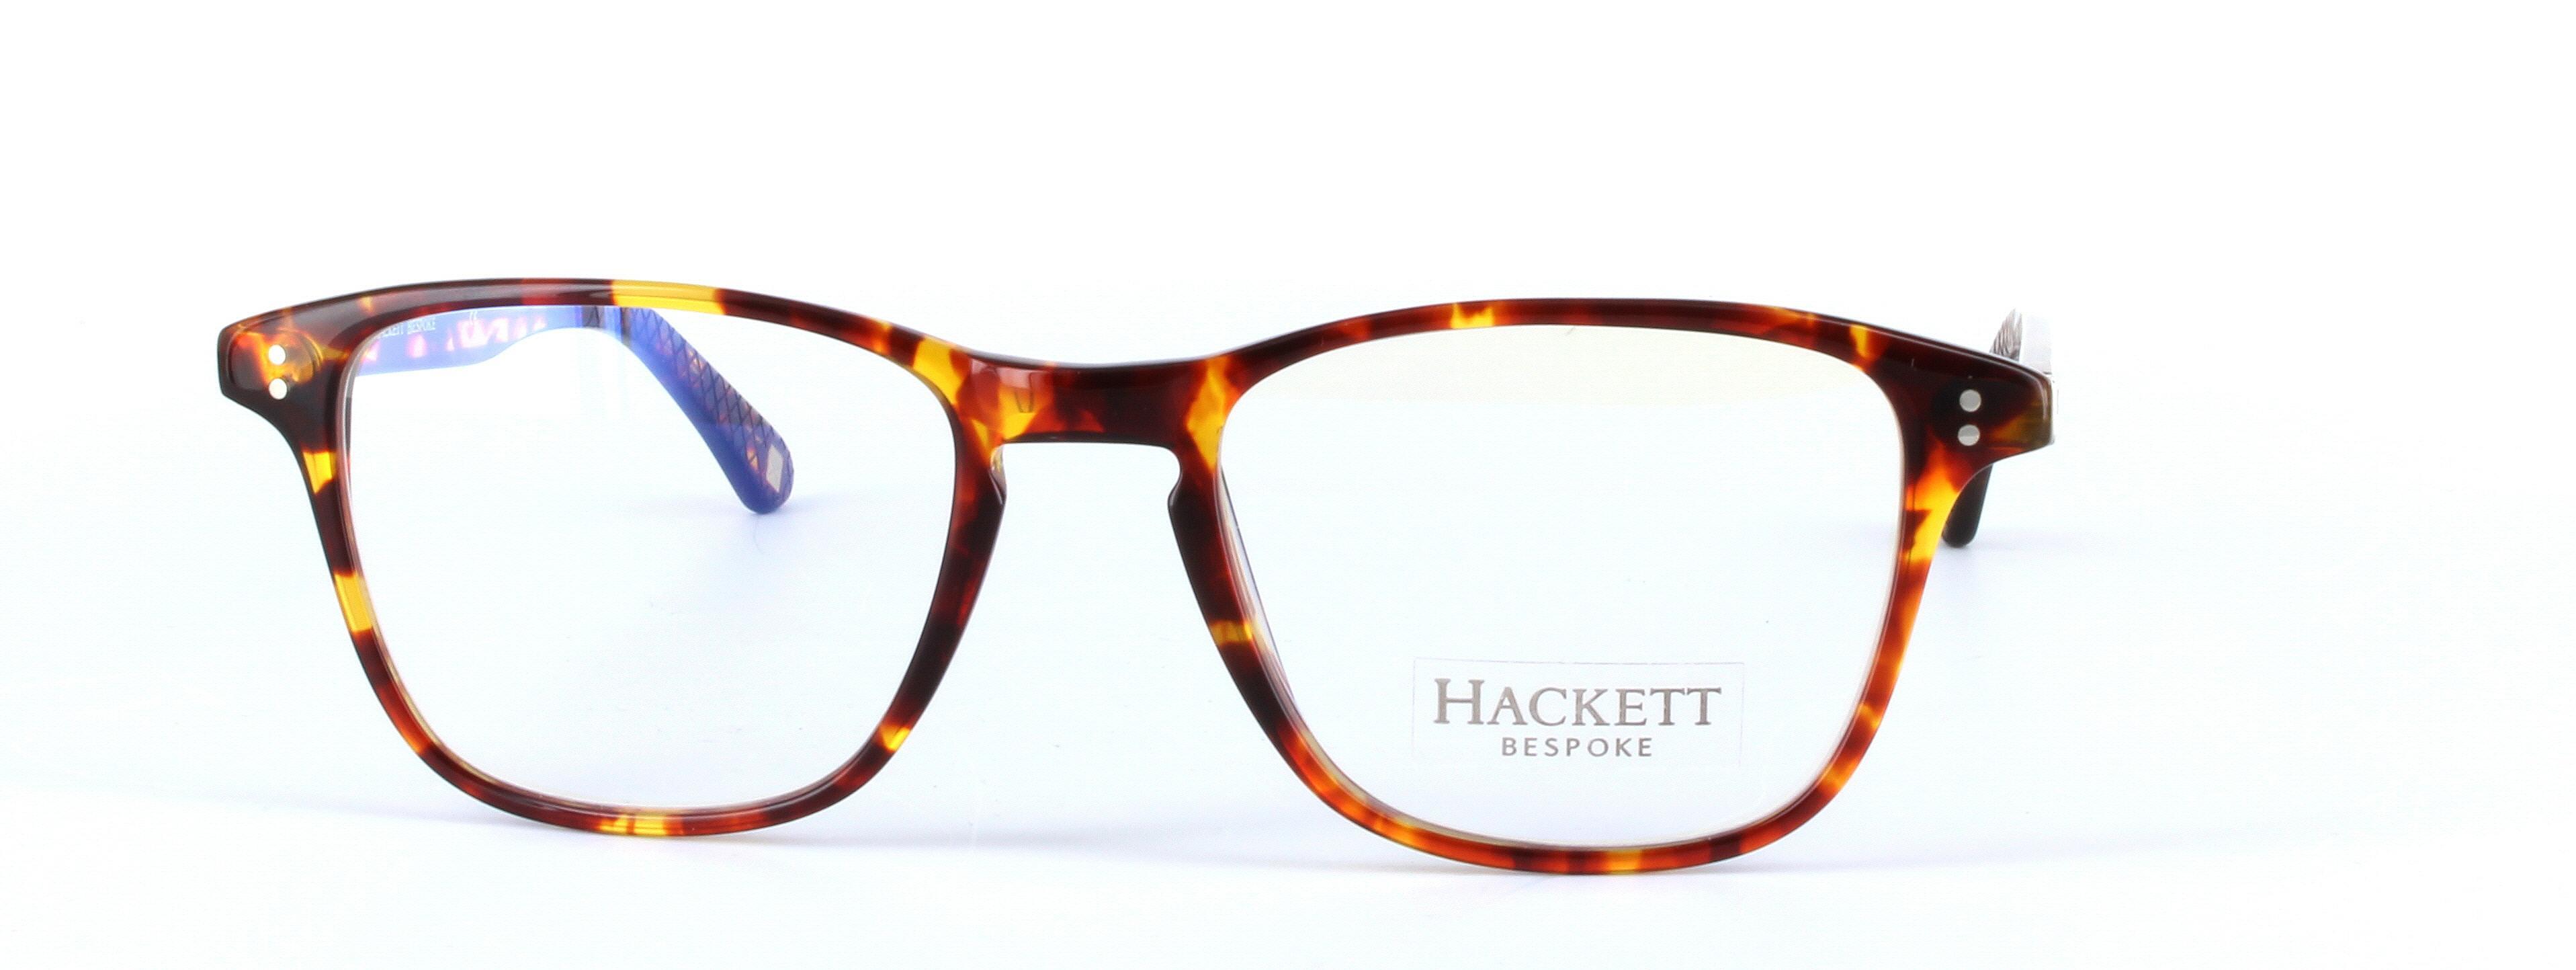 HACKETT BESPOKE (HEB140-127) Brown Full Rim Oval Round Square Acetate Glasses - Image View 5